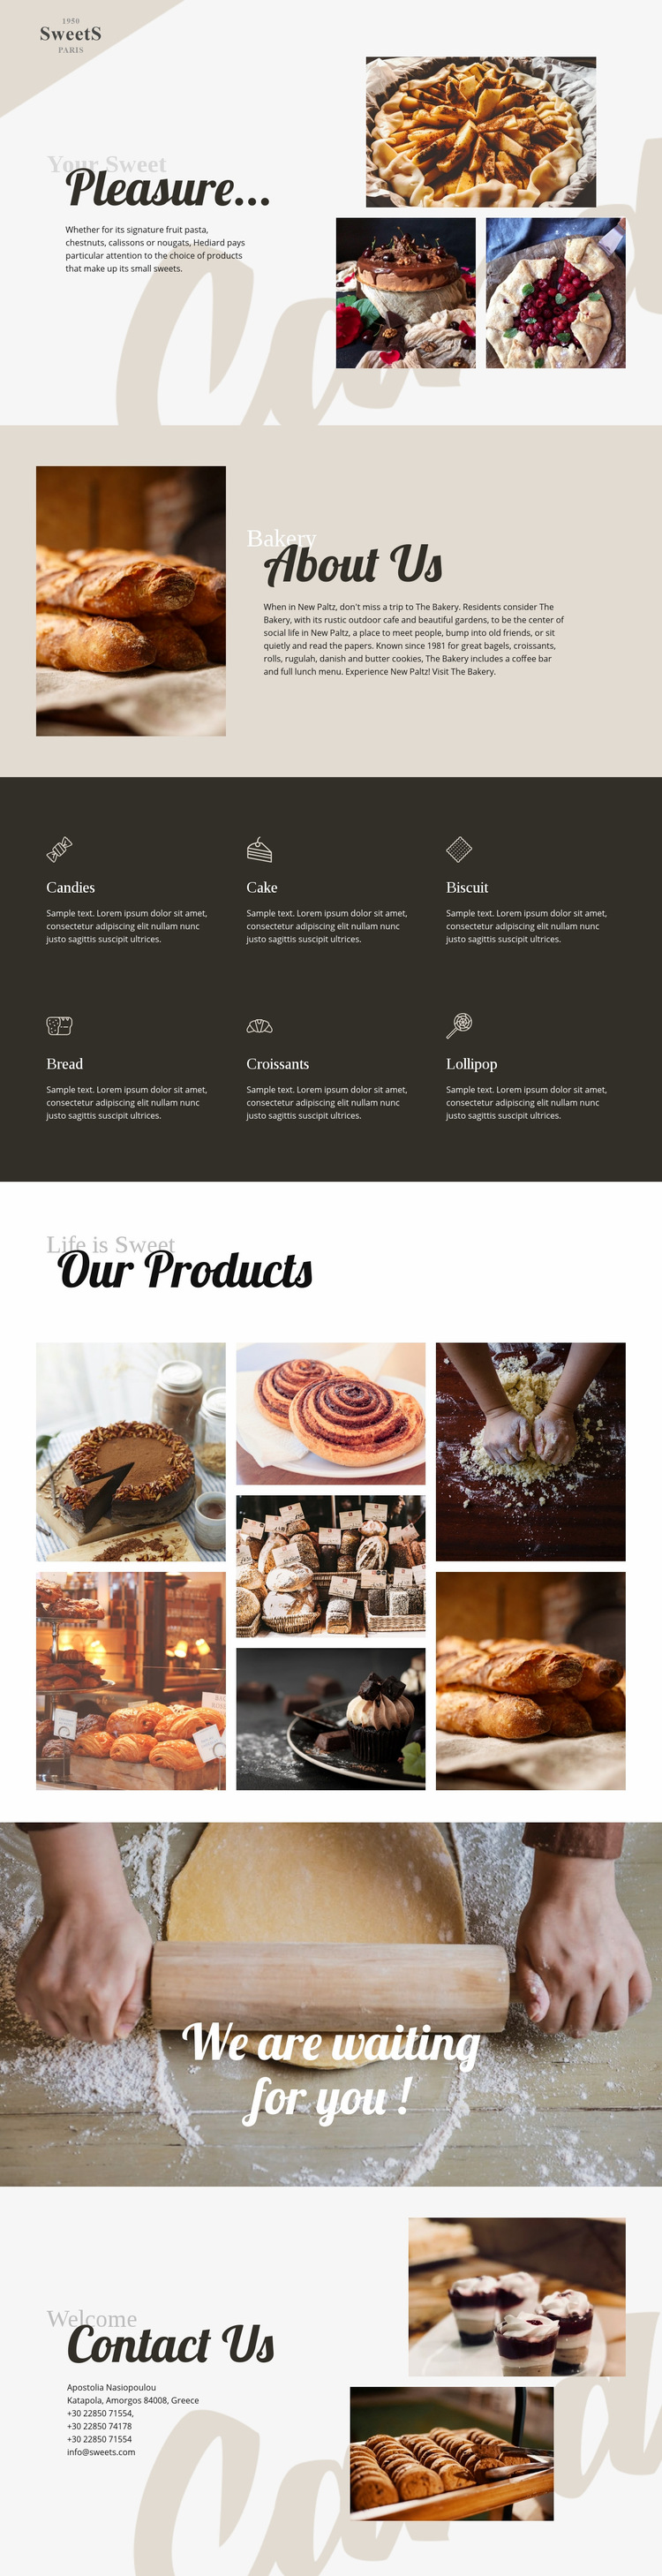 Cakes and baking food Web Page Design